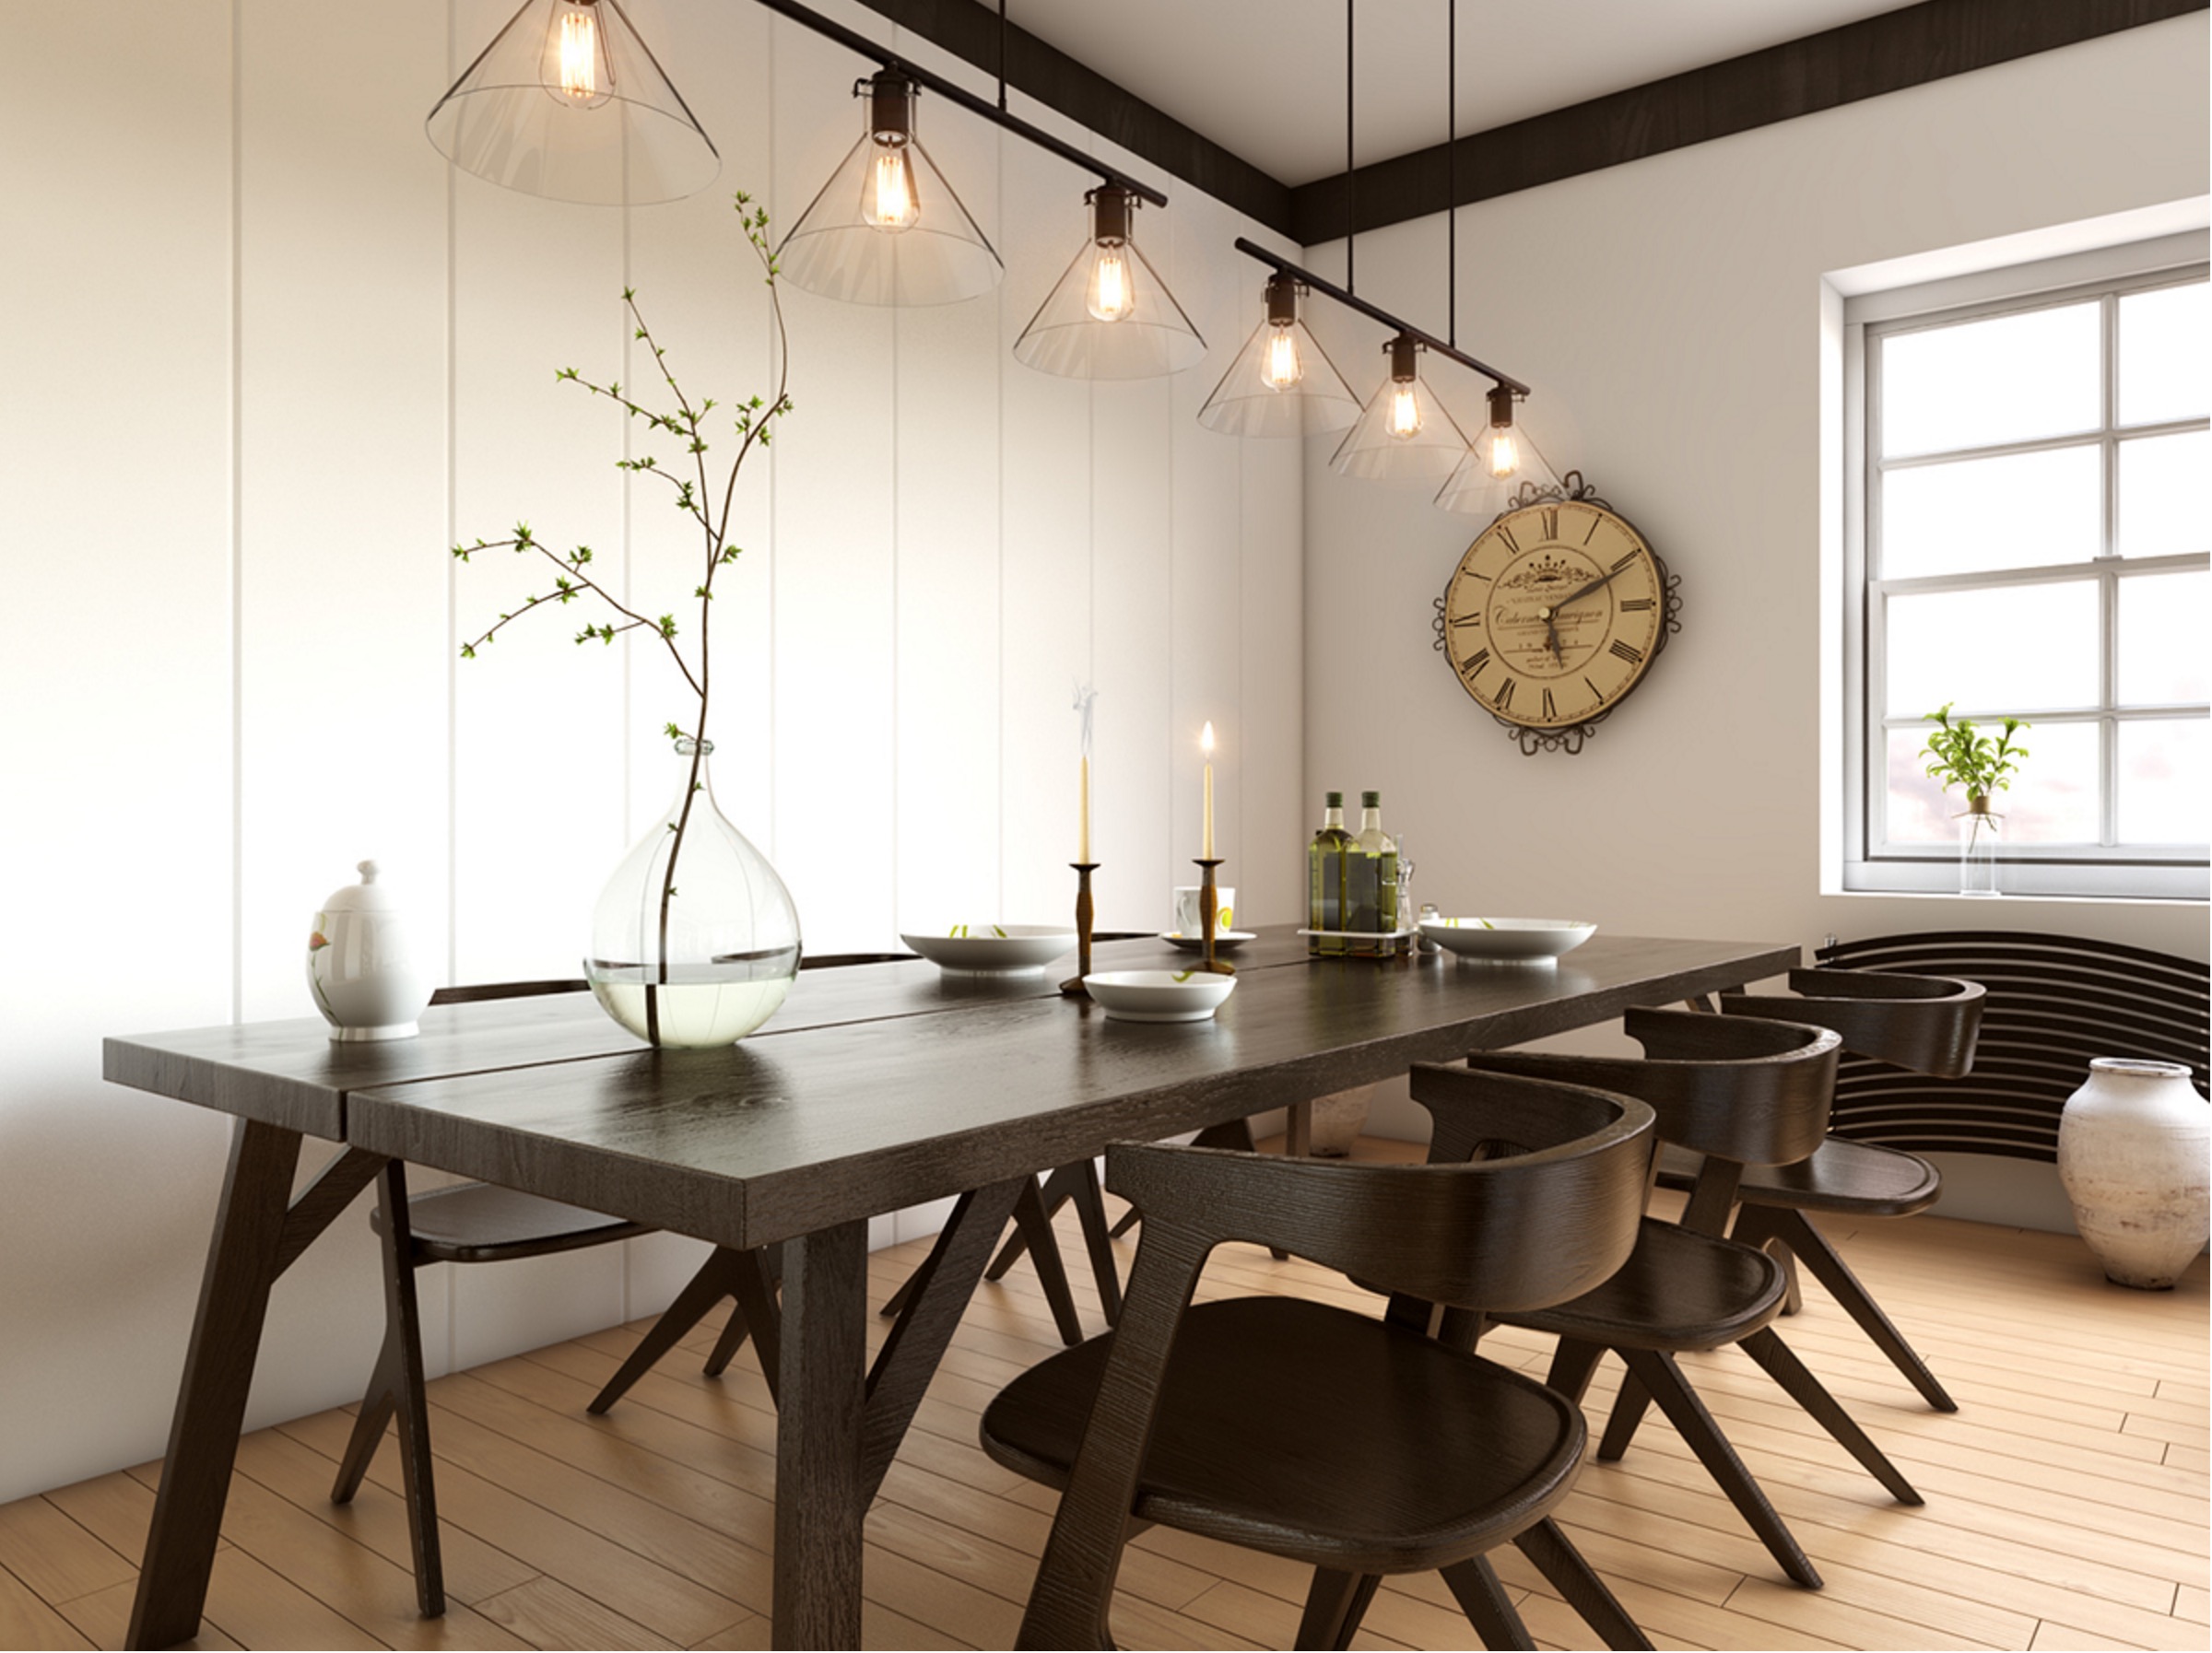 White and dark dining room ideas "width =" 2400 "height =" 1794 "srcset =" https://mileray.com/wp-content/uploads/2016/03/white-and-dark-wood-dining-room. jpg 2400w, https://mileray.com/wp-content/uploads/2016/03/white-and-dark-wood-dining-room-300x224.jpg 300w, https://mileray.com/wp-content/ Uploads / 2016/03 / White-and-dark-wood-dining-room-768x574.jpg 768w, https://mileray.com/wp-content/uploads/2016/03/white-and-dark-wood-dining -room -1024x765.jpg 1024w, https://mileray.com/wp-content/uploads/2016/03/white-and-dark-wood-dining-room-80x60.jpg 80w, https://mileray.com / wp -content / uploads / 2016/03 / white-and-dark-wood-dining-room-265x198.jpg 265w, https://mileray.com/wp-content/uploads/2016/03/white-and- dark wood -Esszimmer-696x520.jpg 696w, https://mileray.com/wp-content/uploads/2016/03/white-and-dark-wood-dining-room-1068x798.jpg 1068w, https: //mileray.com /wp-content/uploads/2016/03/white-and-dark-wood-dining-room-562x420.jpg 562w "Sizes =" (maximum width: 2400px) 100vw, 2400px